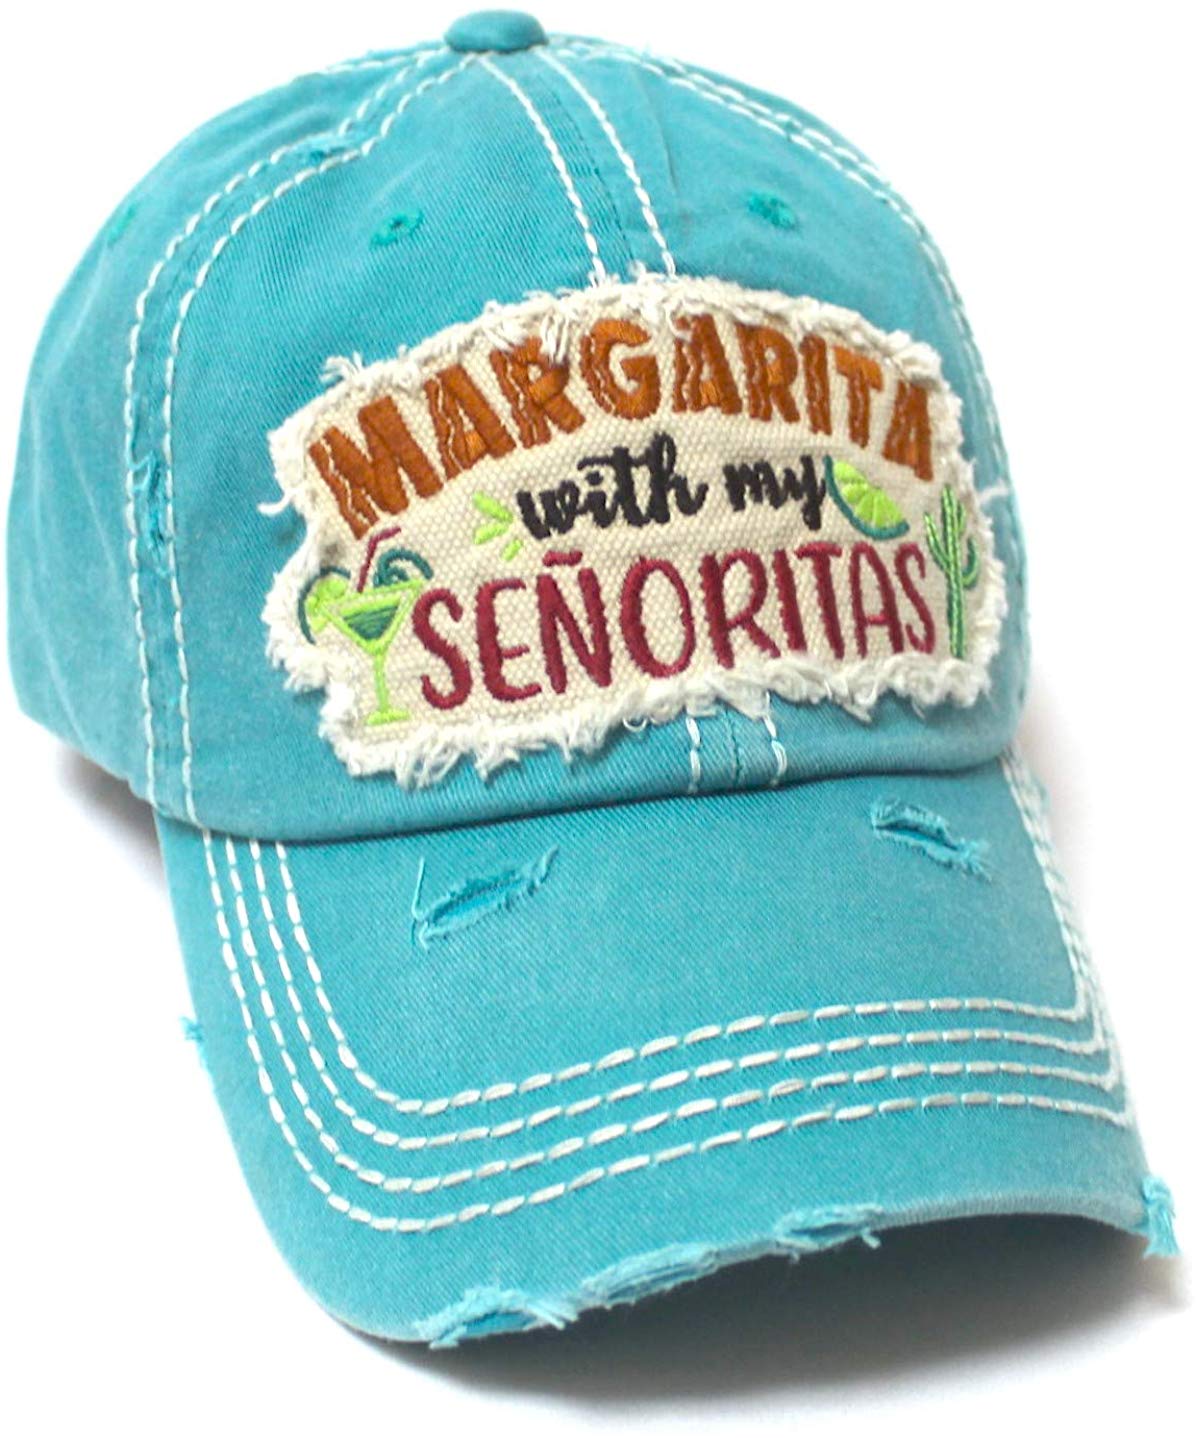 CAPS 'N VINTAGE Women's Ballcap Margarita with My Senoritas Beach Themed Patch Embroidery Hat, Turquoise Blue - Caps 'N Vintage 